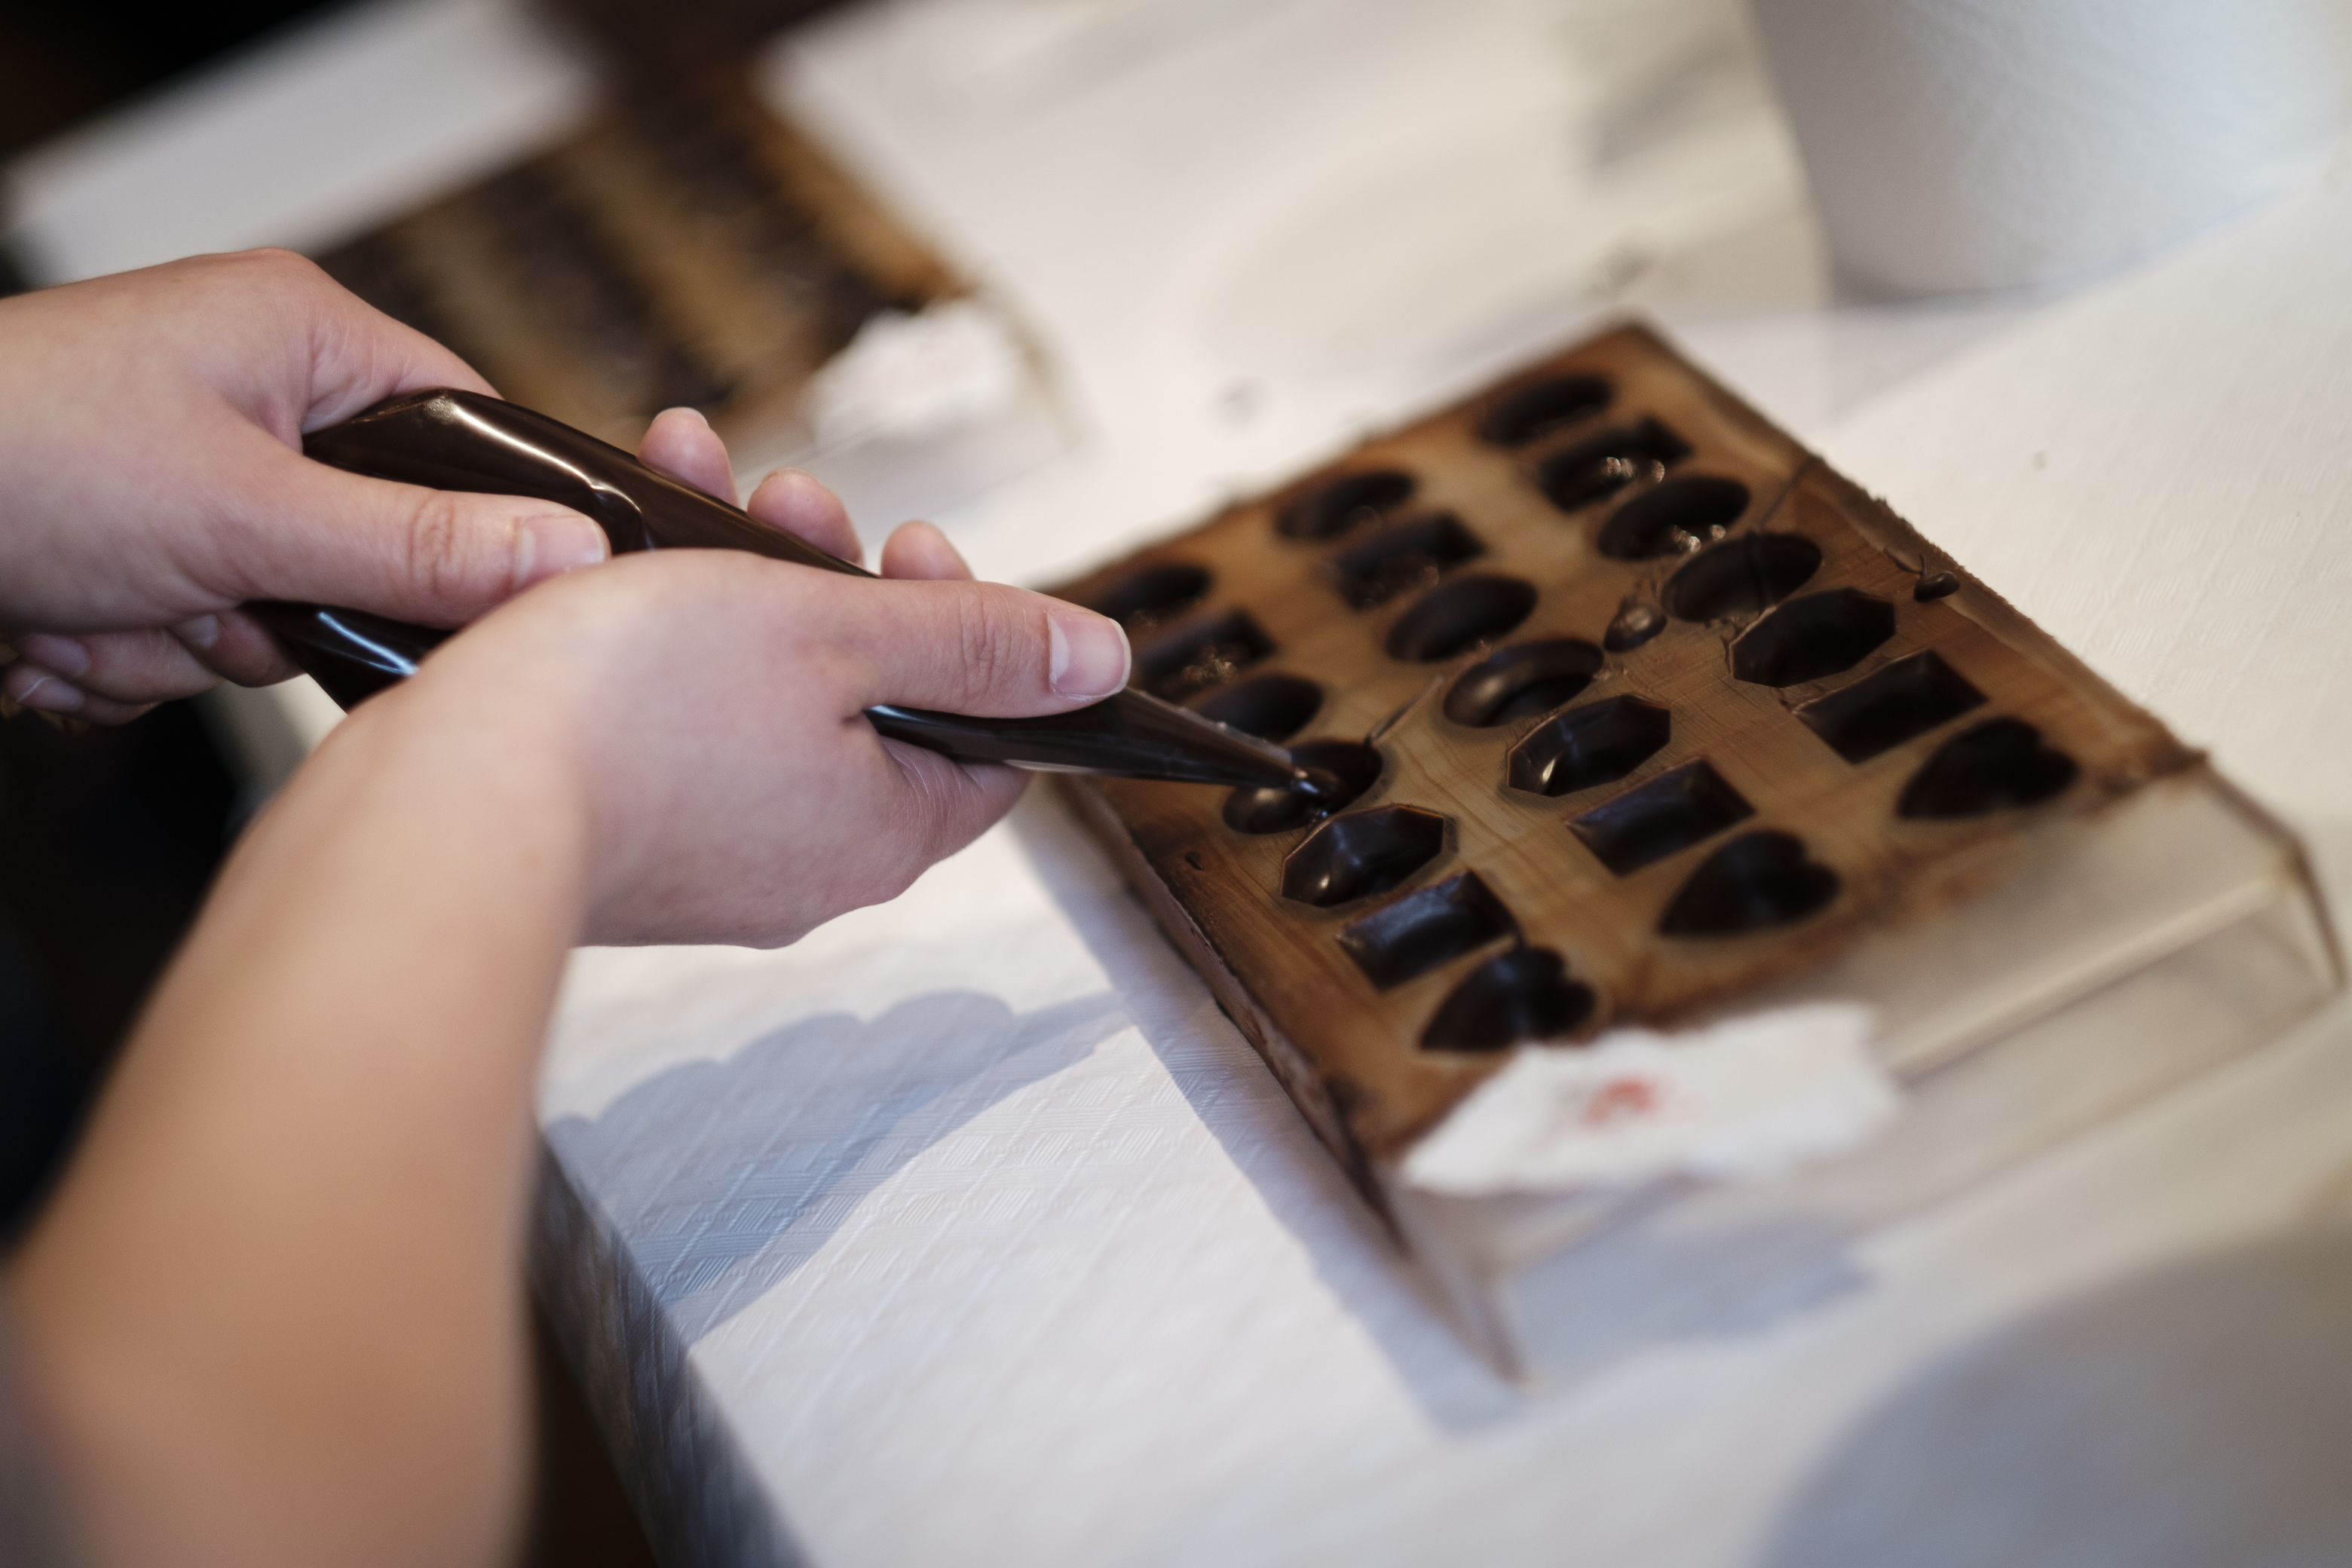 fill up chocolates by yourself at our workshop